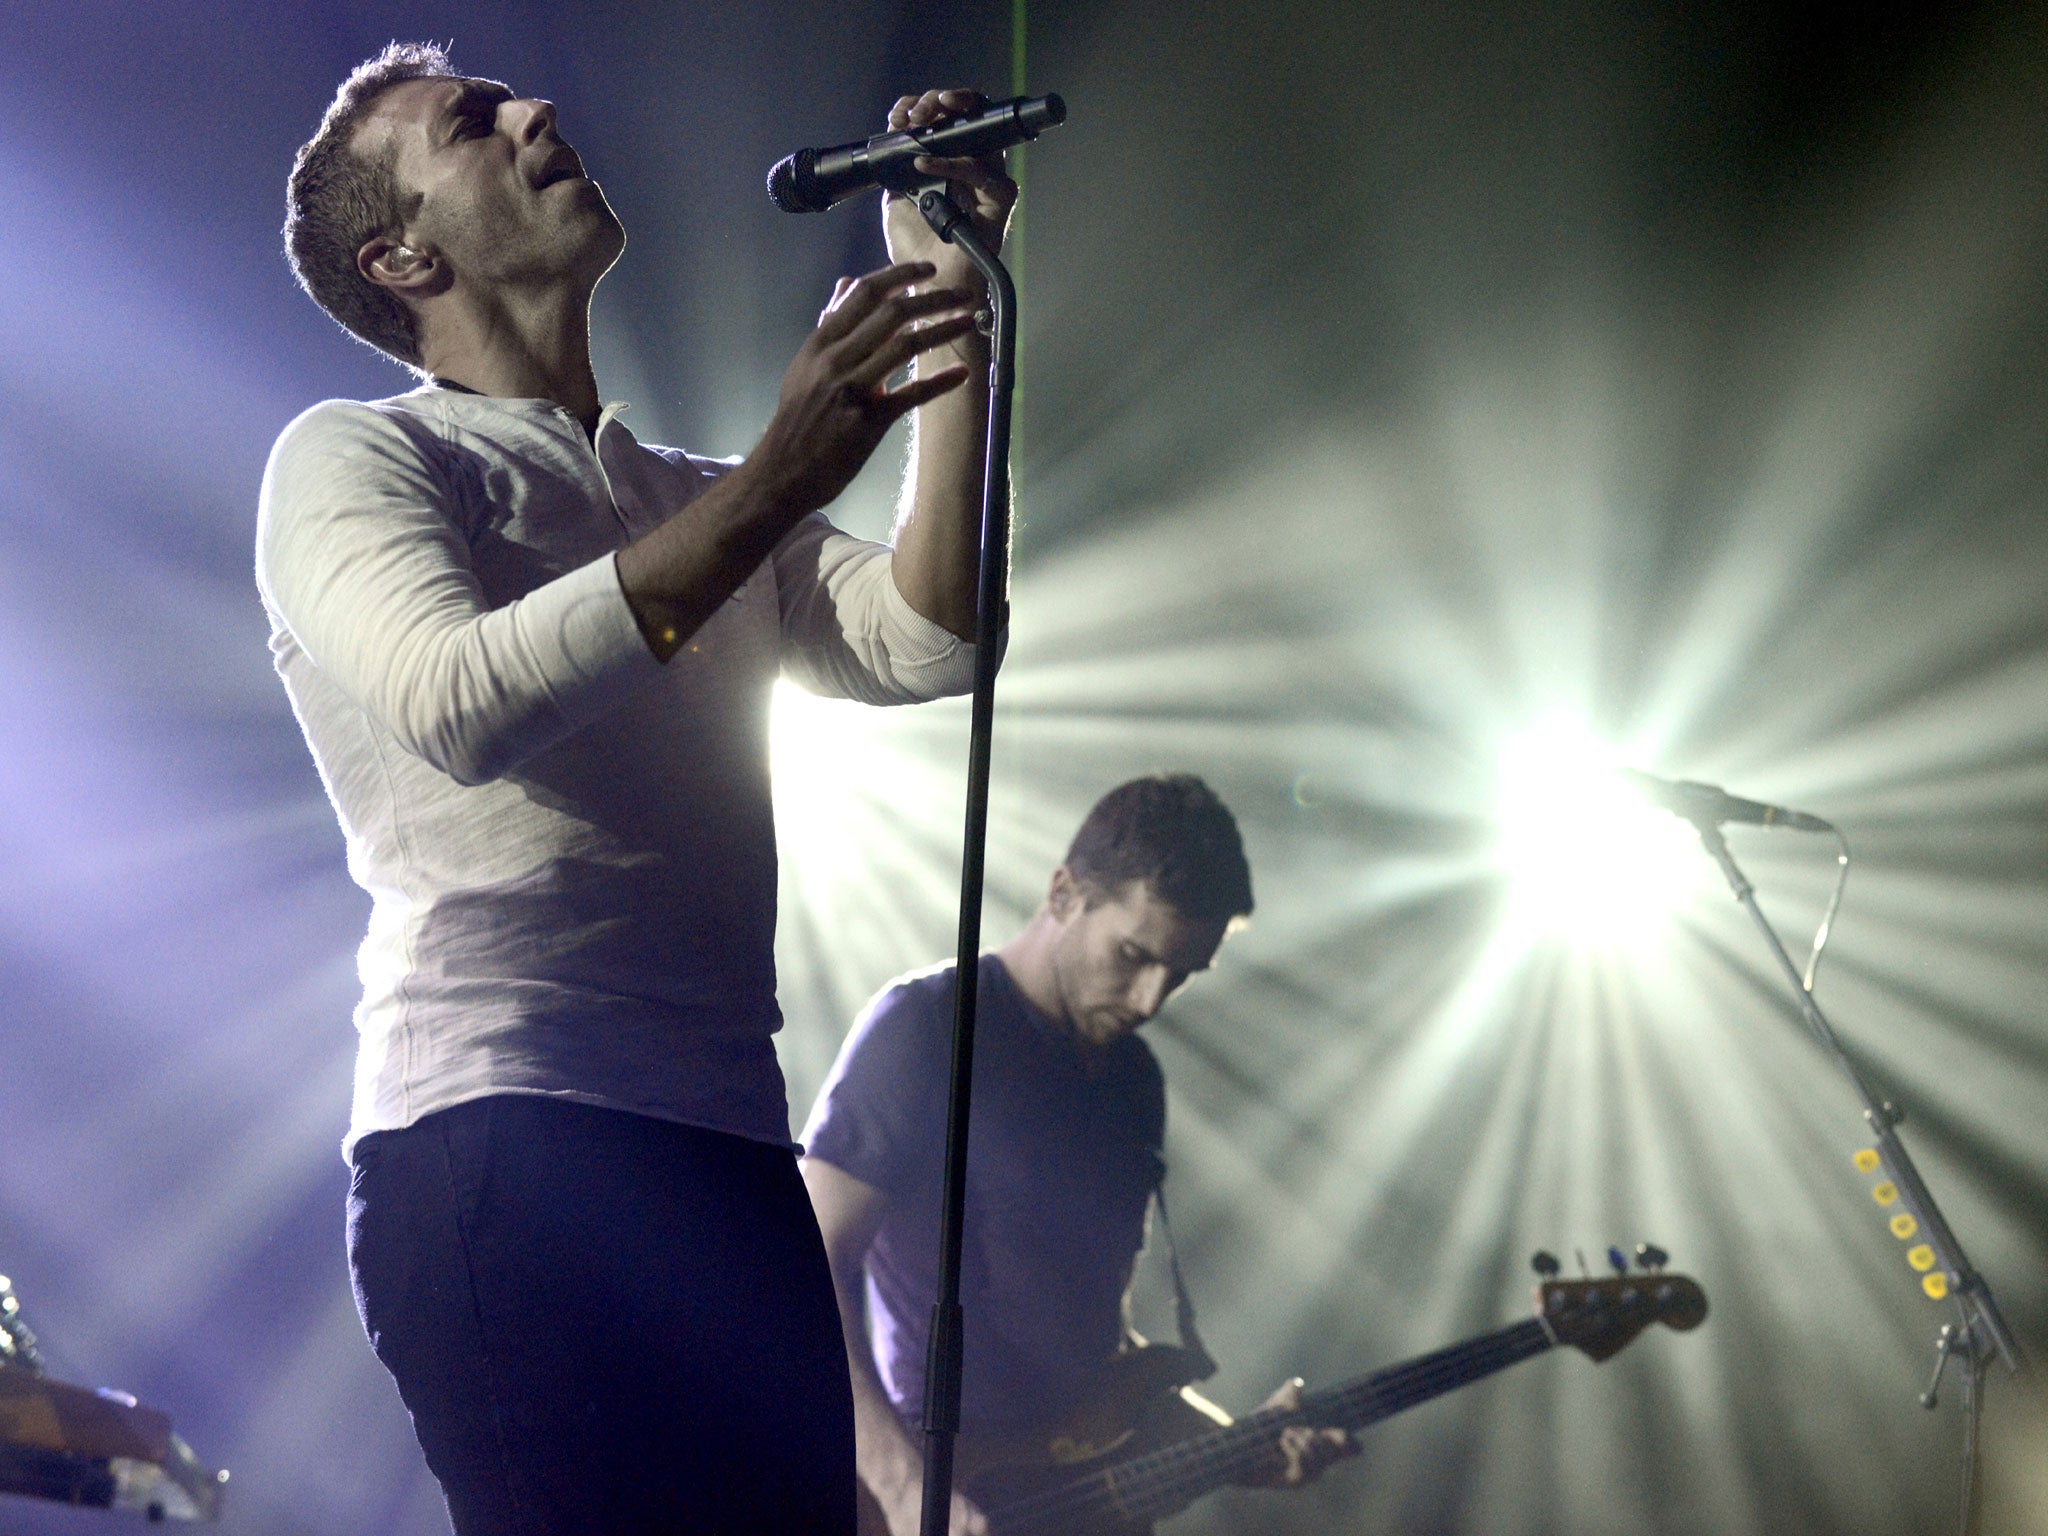 Coldplay have achieved their sixth consecutive UK number one album with Ghost Stories